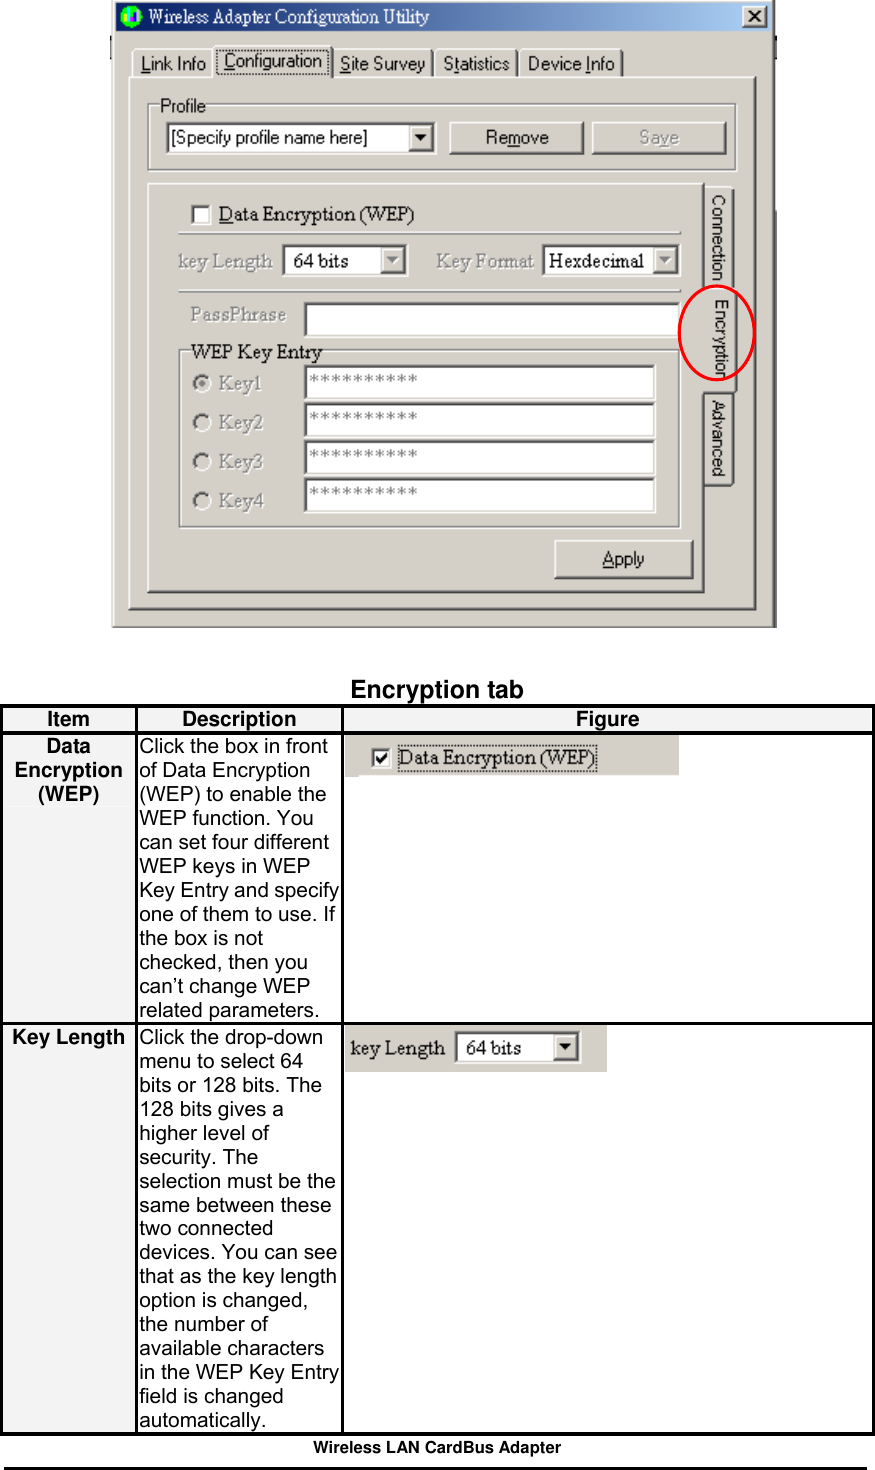     Encryption tab Item  Description  Figure Data Encryption (WEP) Click the box in front of Data Encryption (WEP) to enable the WEP function. You can set four different WEP keys in WEP Key Entry and specify one of them to use. If the box is not checked, then you can’t change WEP related parameters.  Key Length  Click the drop-down menu to select 64 bits or 128 bits. The 128 bits gives a higher level of security. The selection must be the same between these two connected devices. You can see that as the key lengthoption is changed, the number of available characters in the WEP Key Entry field is changed automatically.   Wireless LAN CardBus Adapter 